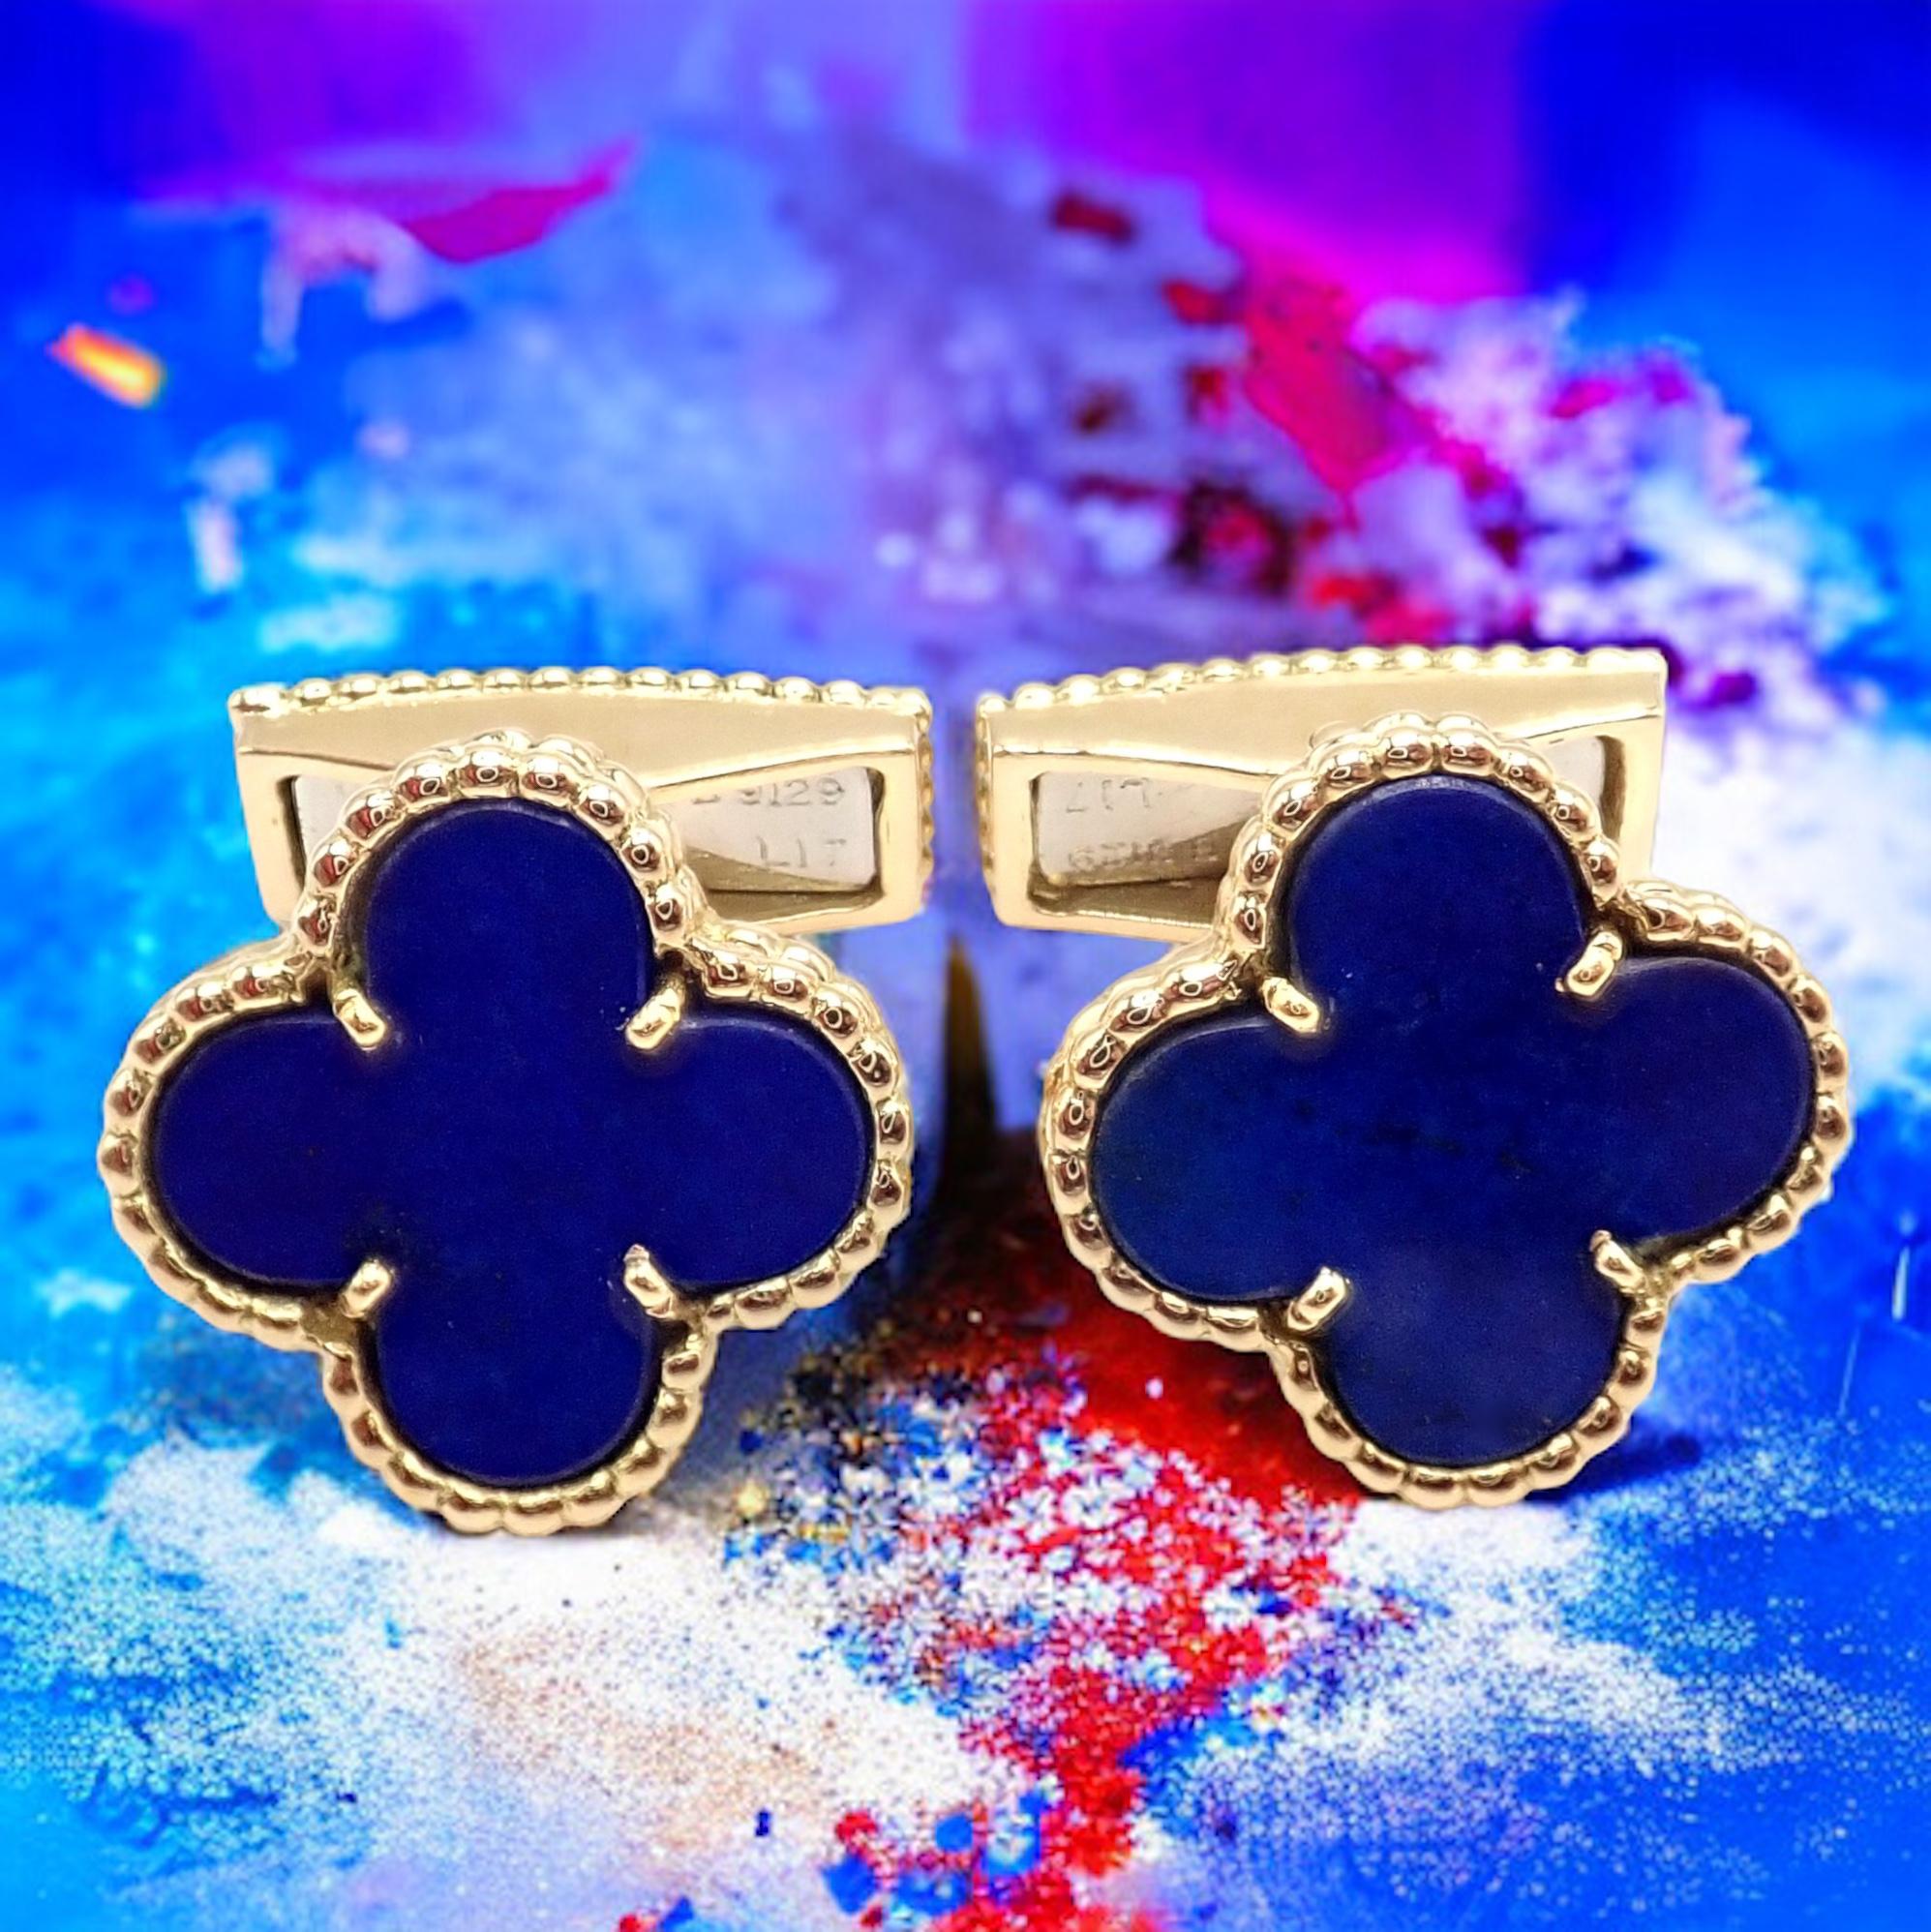 The Authentic Van Cleef & Arpels 18k Yellow Gold Vintage Alhambra Lapis Lazuli Cufflinks are a striking accessory that exudes luxury. Made from 18k yellow gold, these cufflinks feature exquisite lapis lazuli stones. The deep blue hue of the lapis